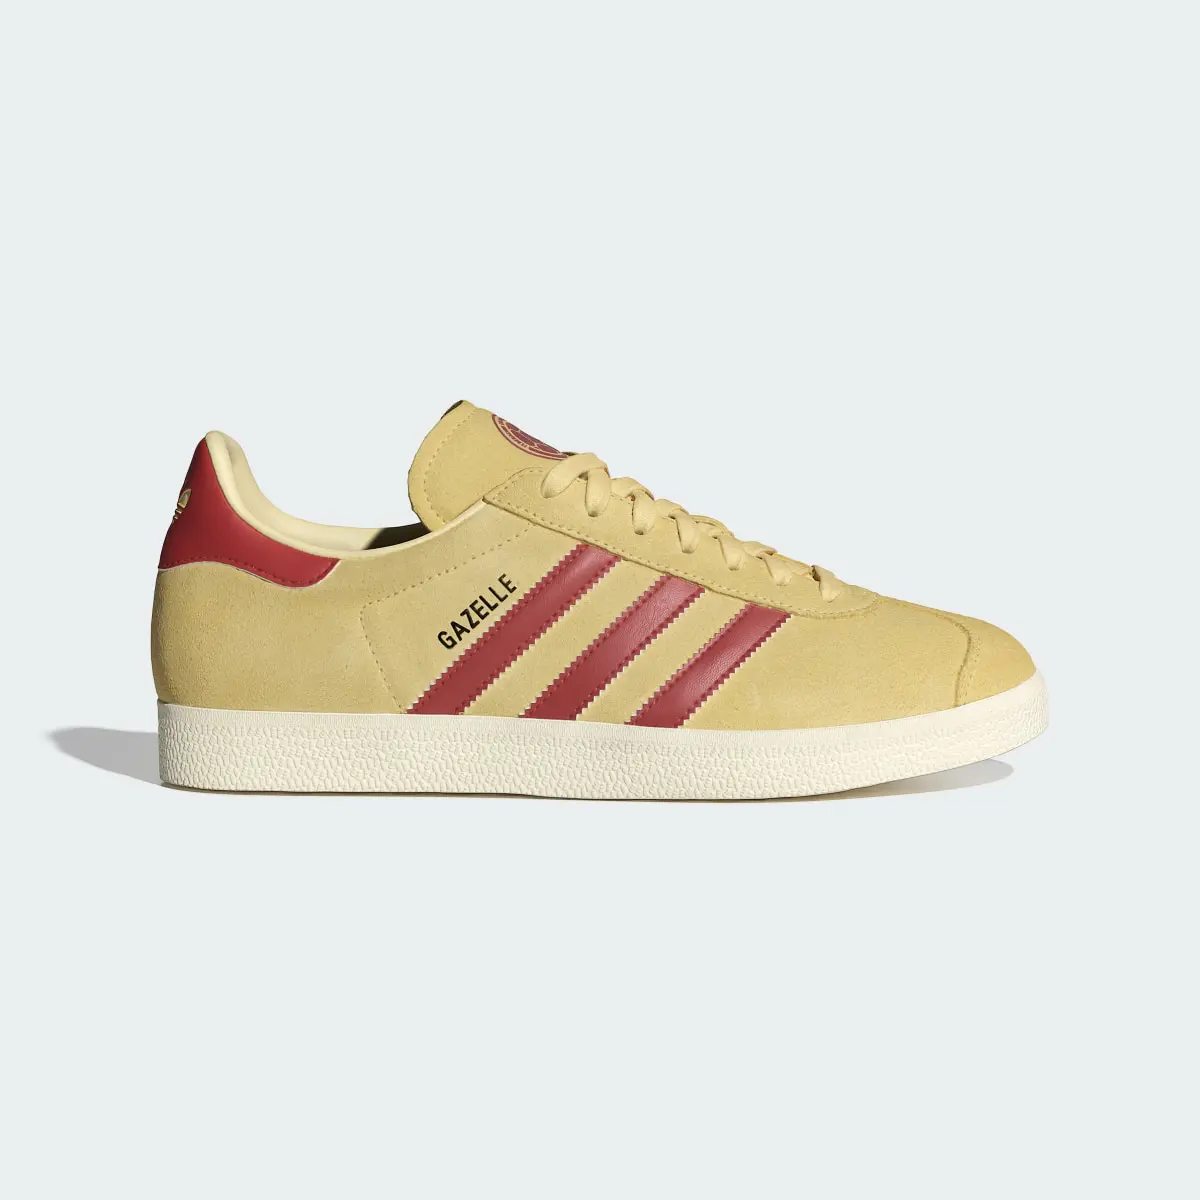 Adidas Gazelle Colombia Shoes. 2